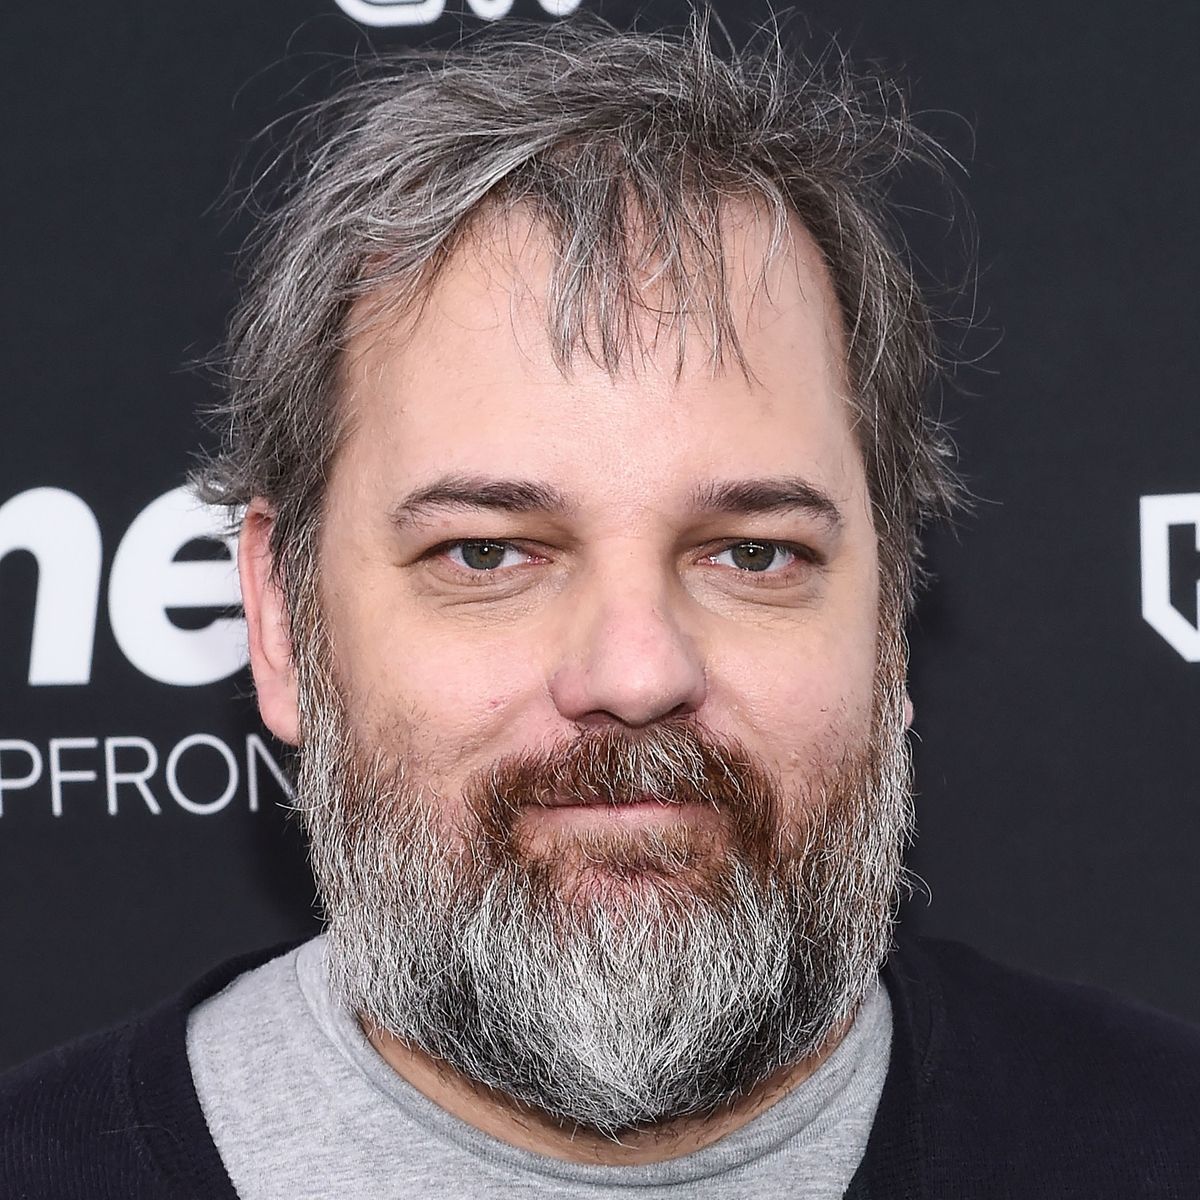 Dan Harmon Maybe Confirmed A Community Movie Is In The Works